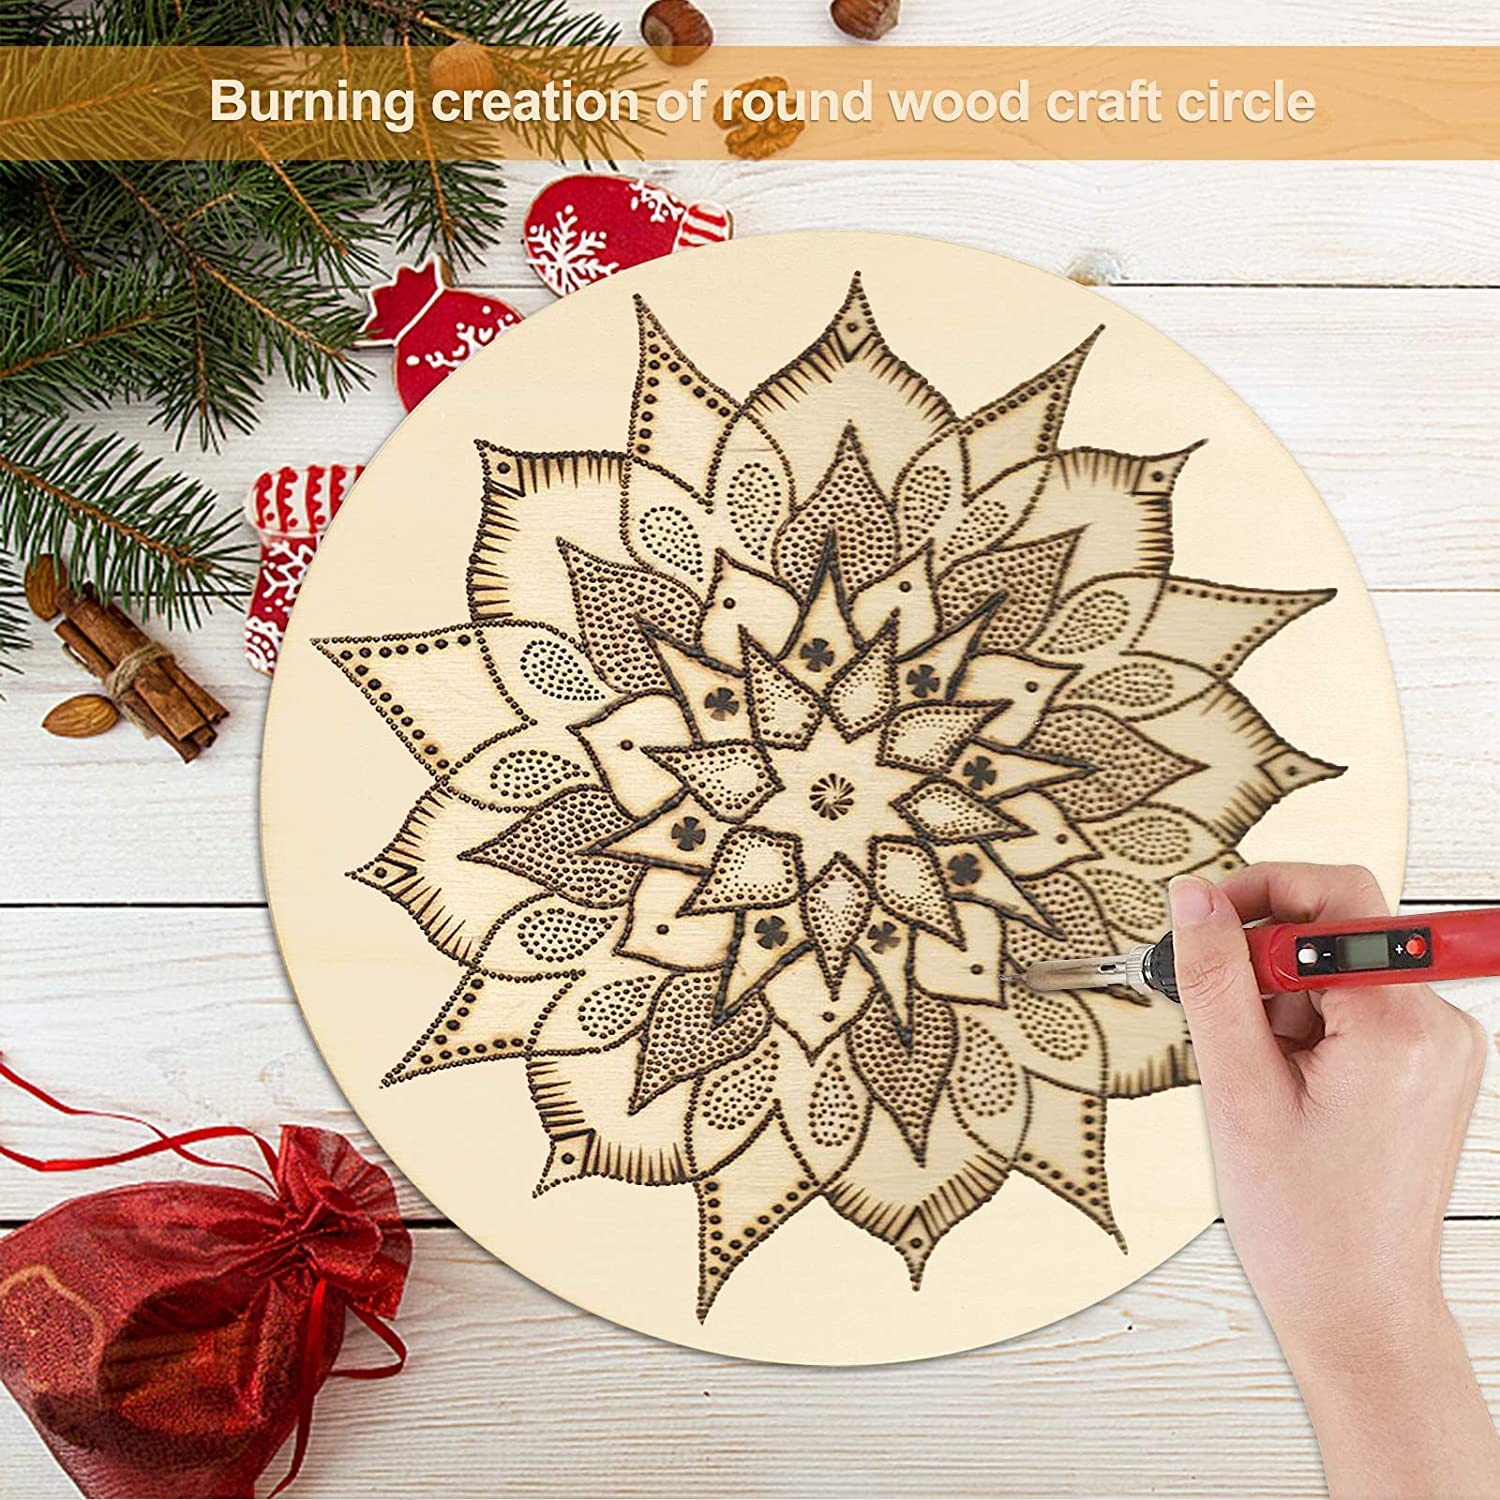 60 Pack 3 inch Wood Circles for Crafts Unfinished Wood Rounds Wooden Cutouts for Crafts, Wooden Circles for Kids Painting, Wood Burning Blank Wood